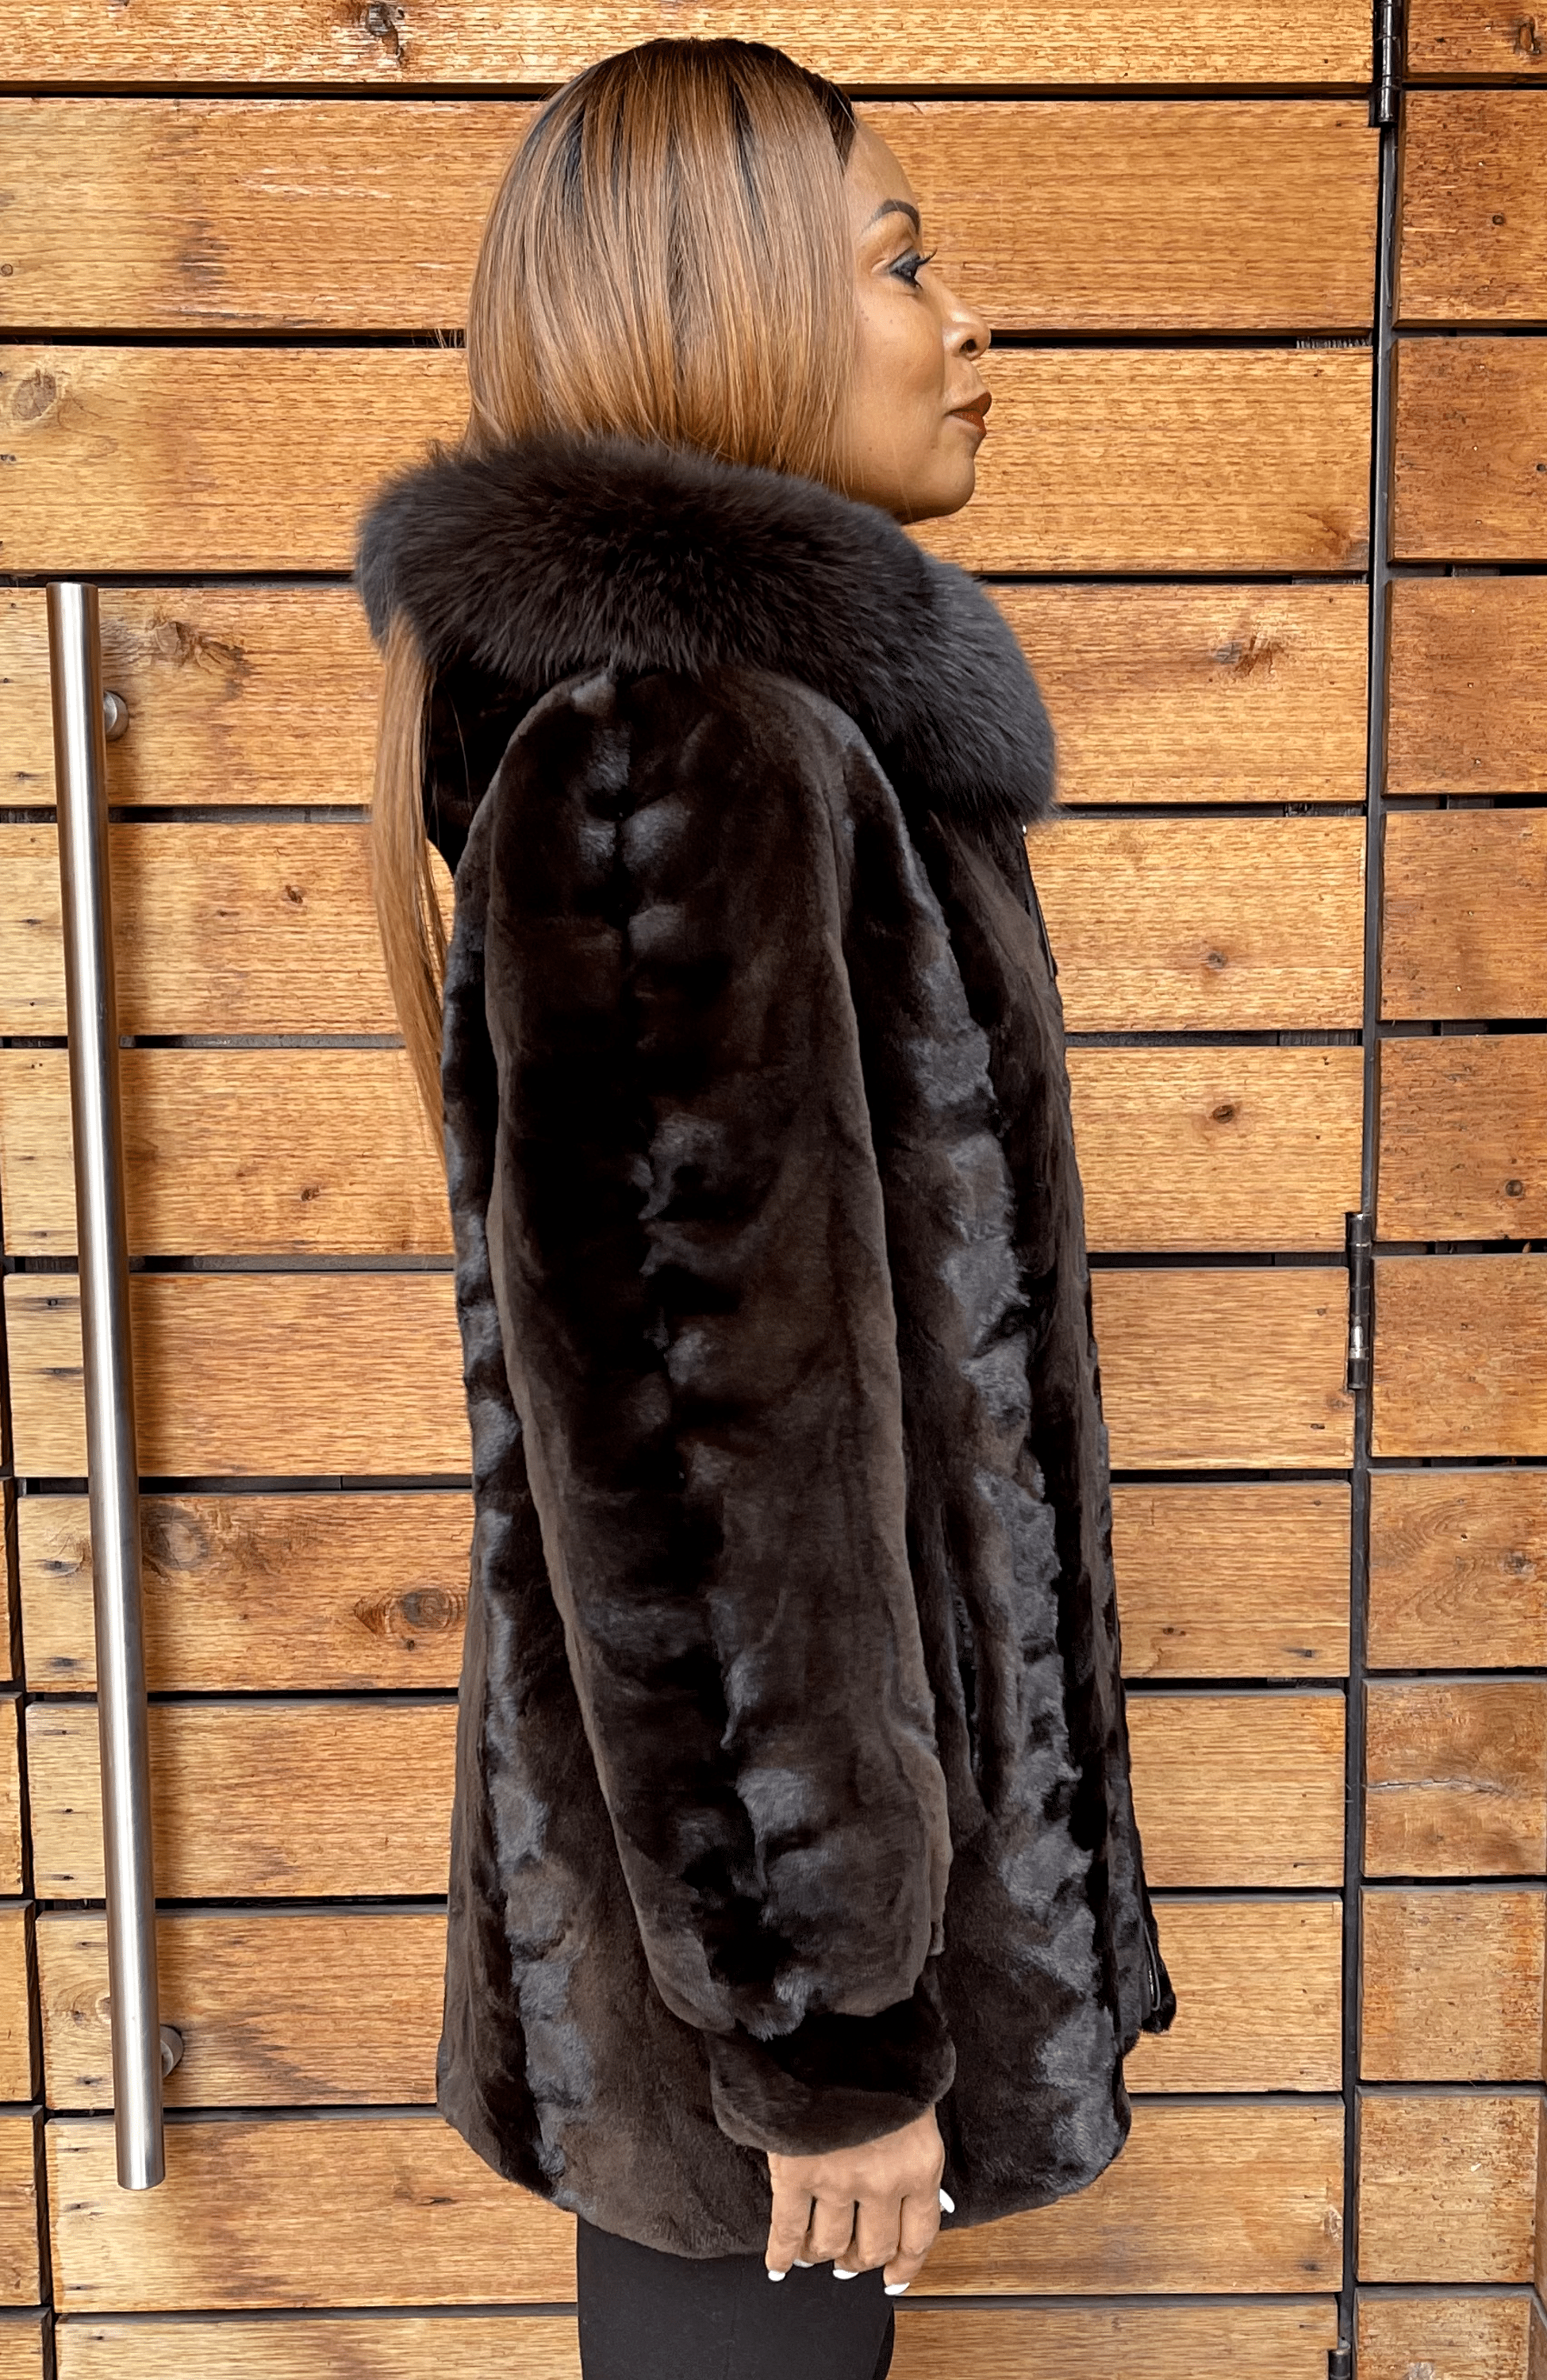 Toffee Brown Mink Fur Semi-Sheared Exotic Jacket w/ Removable Cape